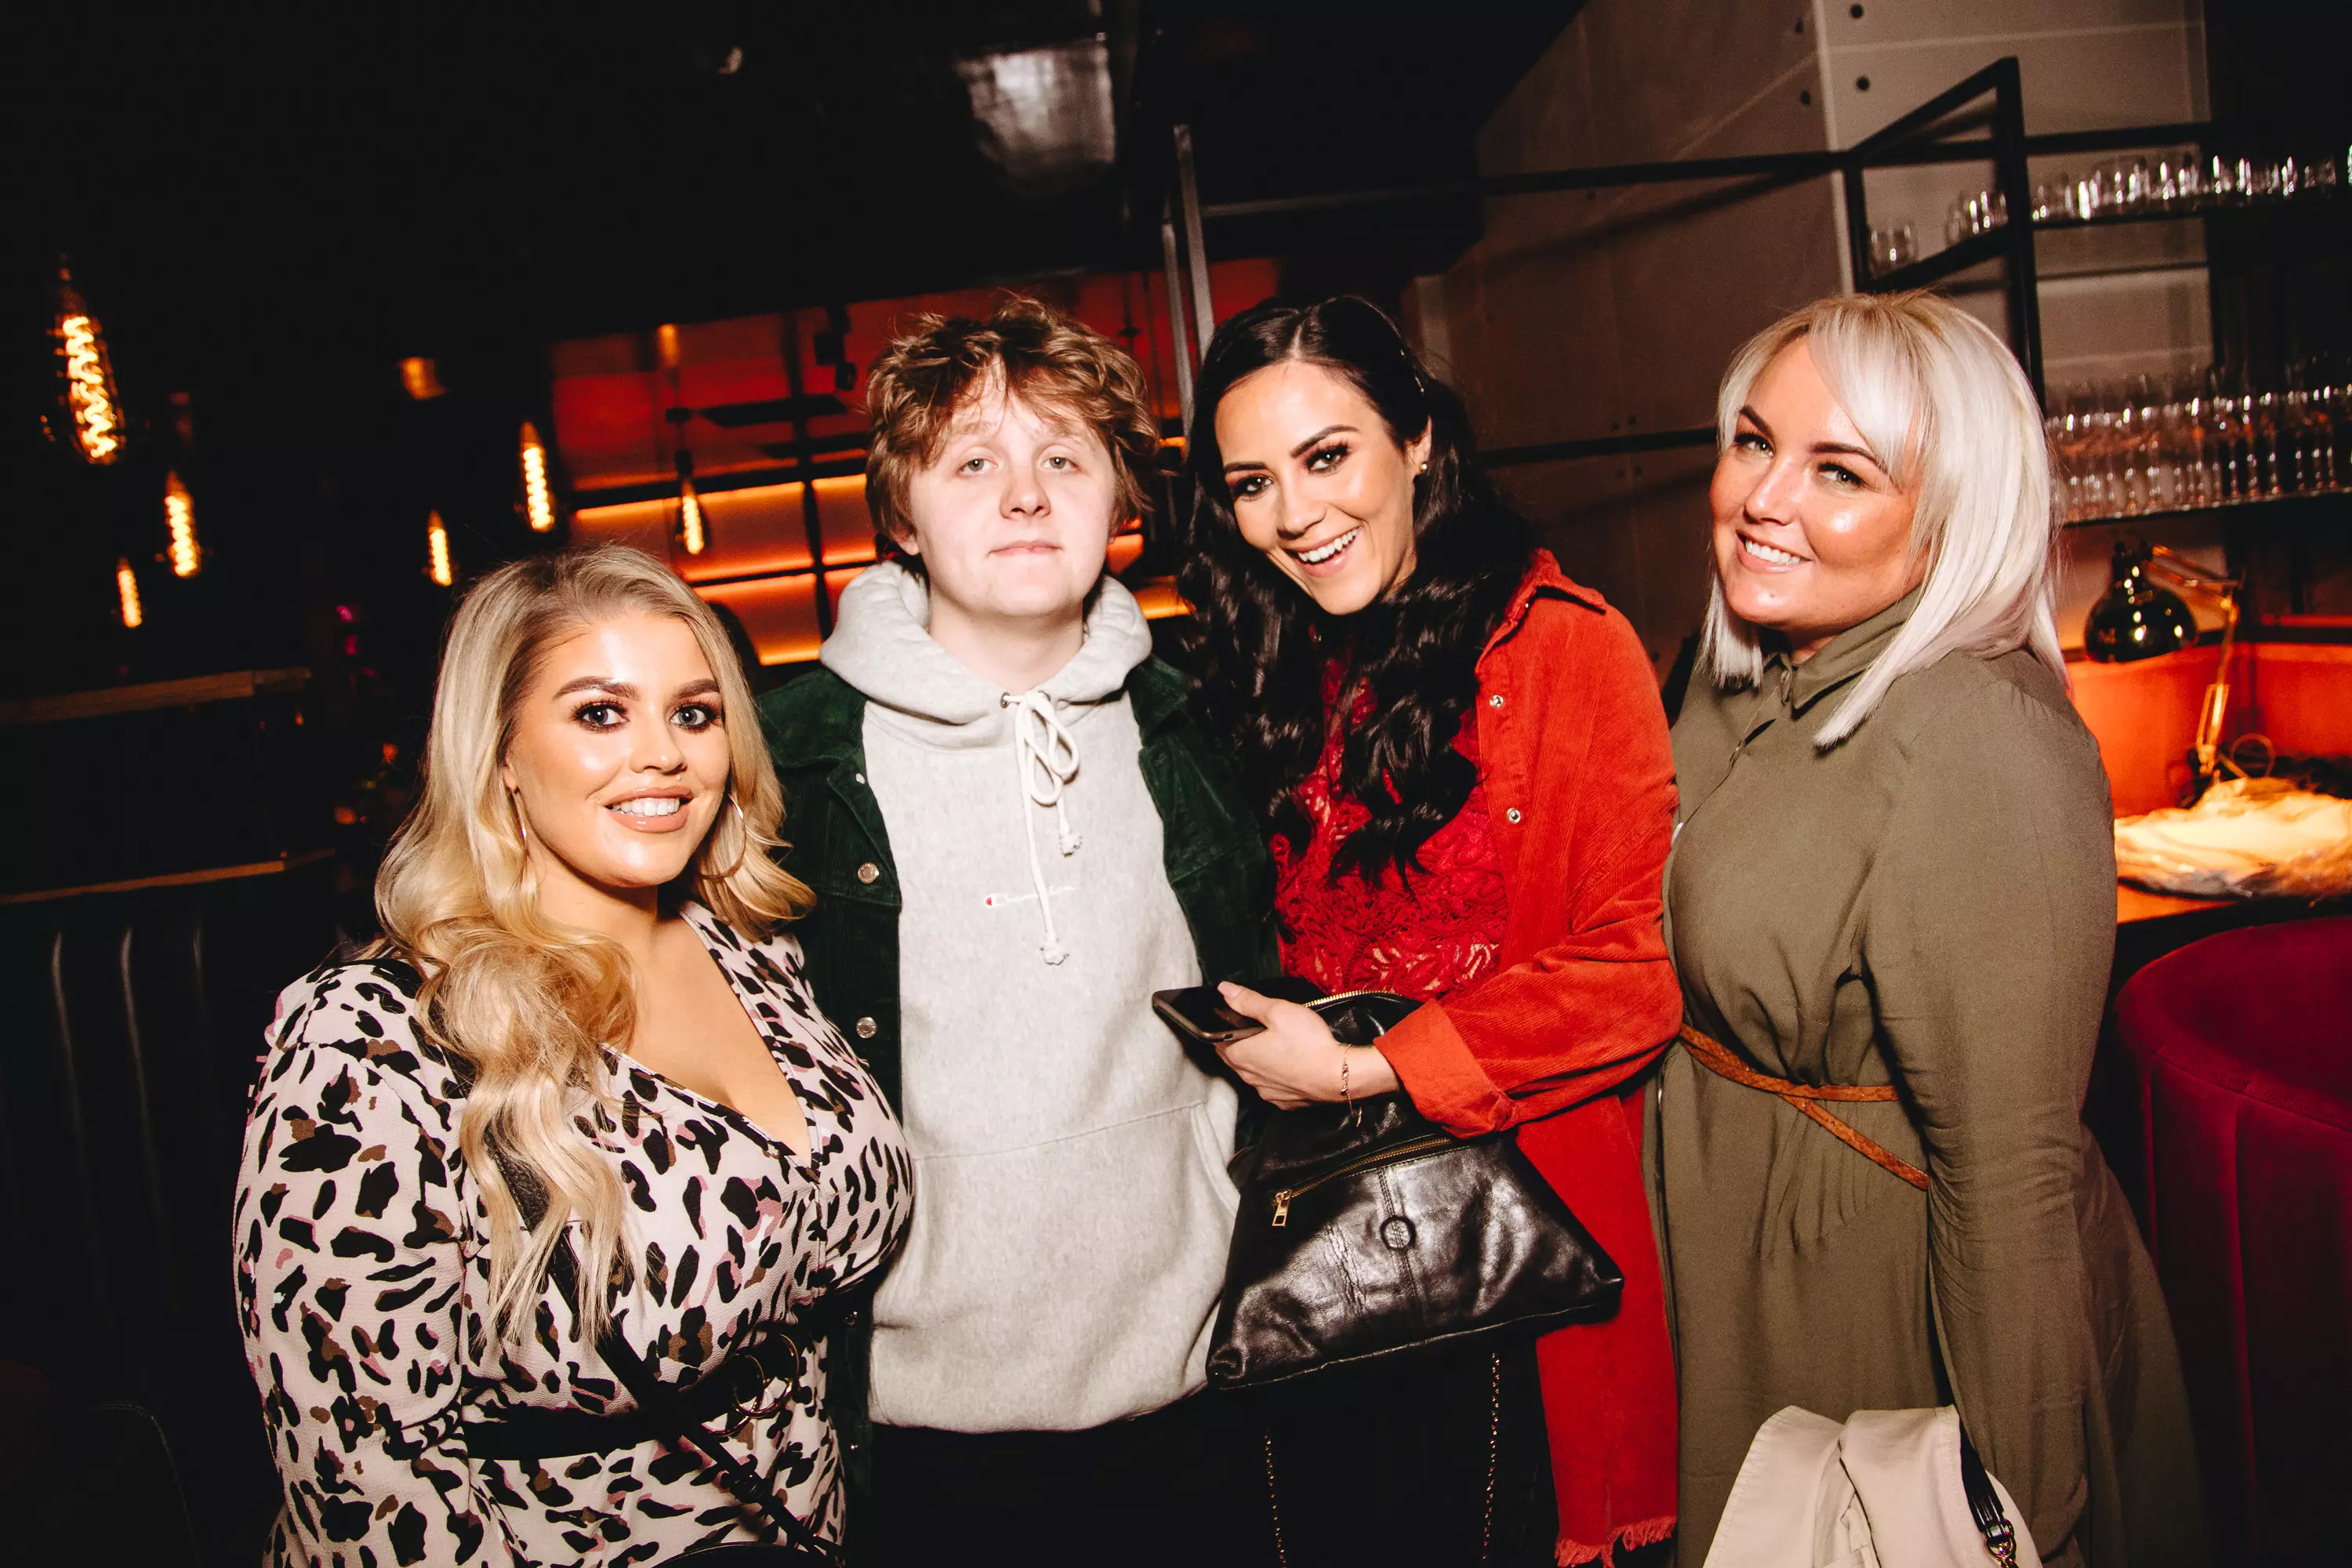 Lewis Capaldi posed with fans.